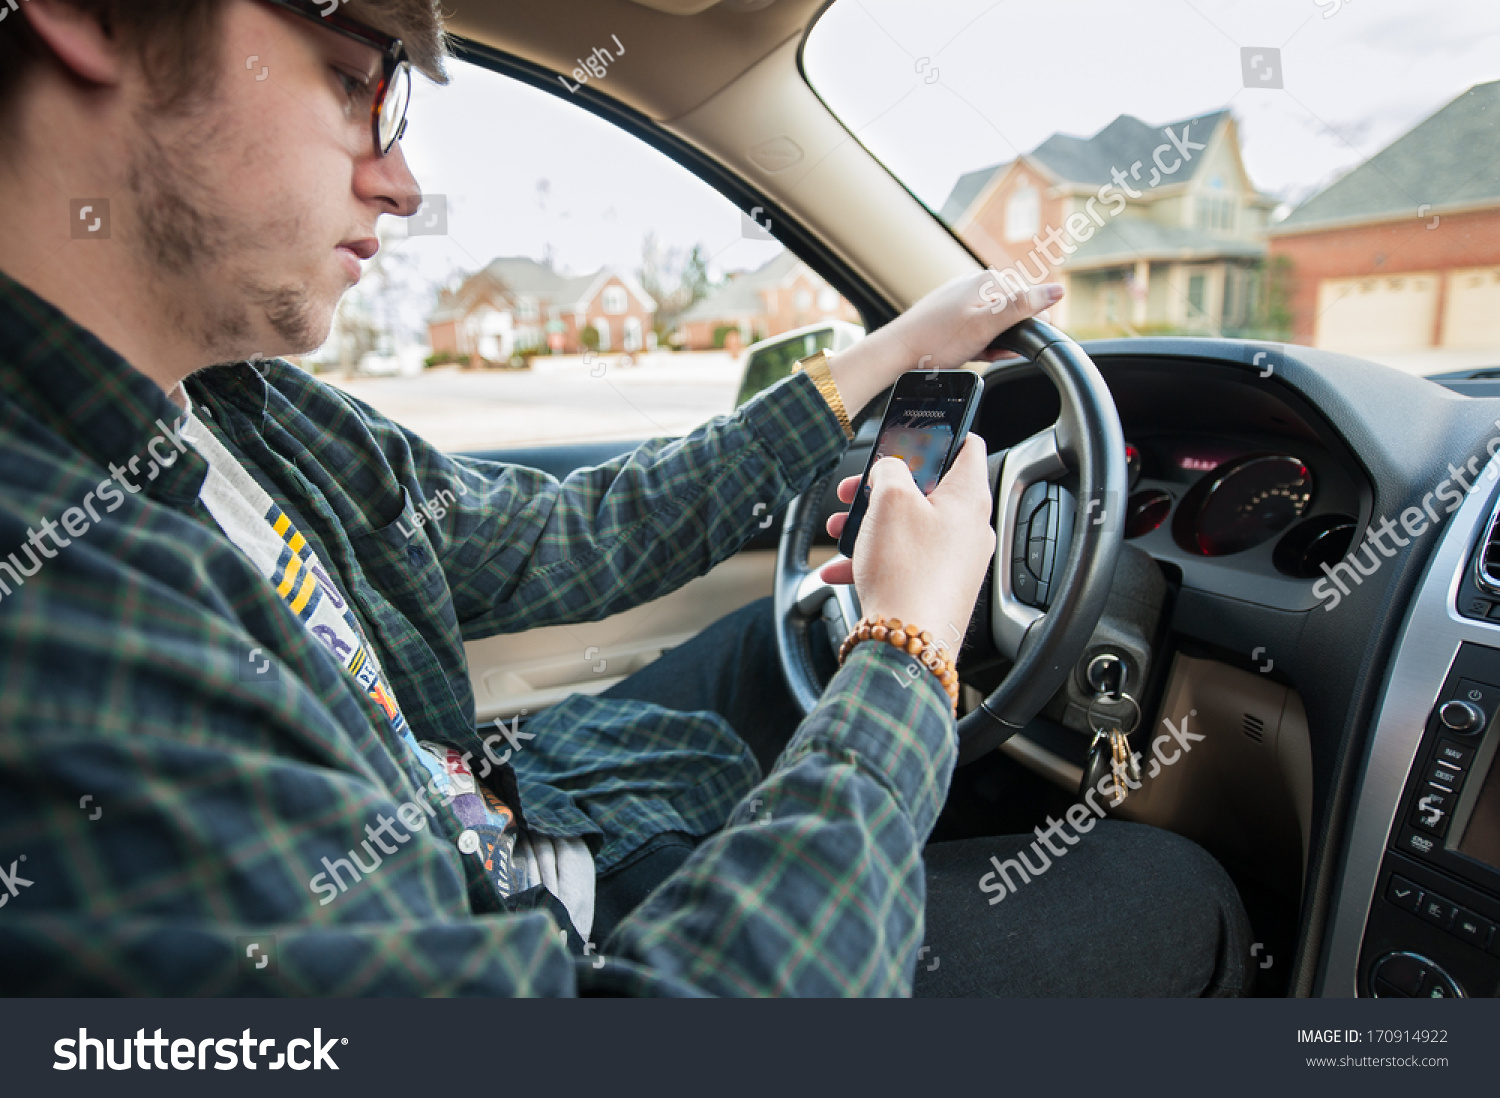 Edit Teens And Distracted Driving 87